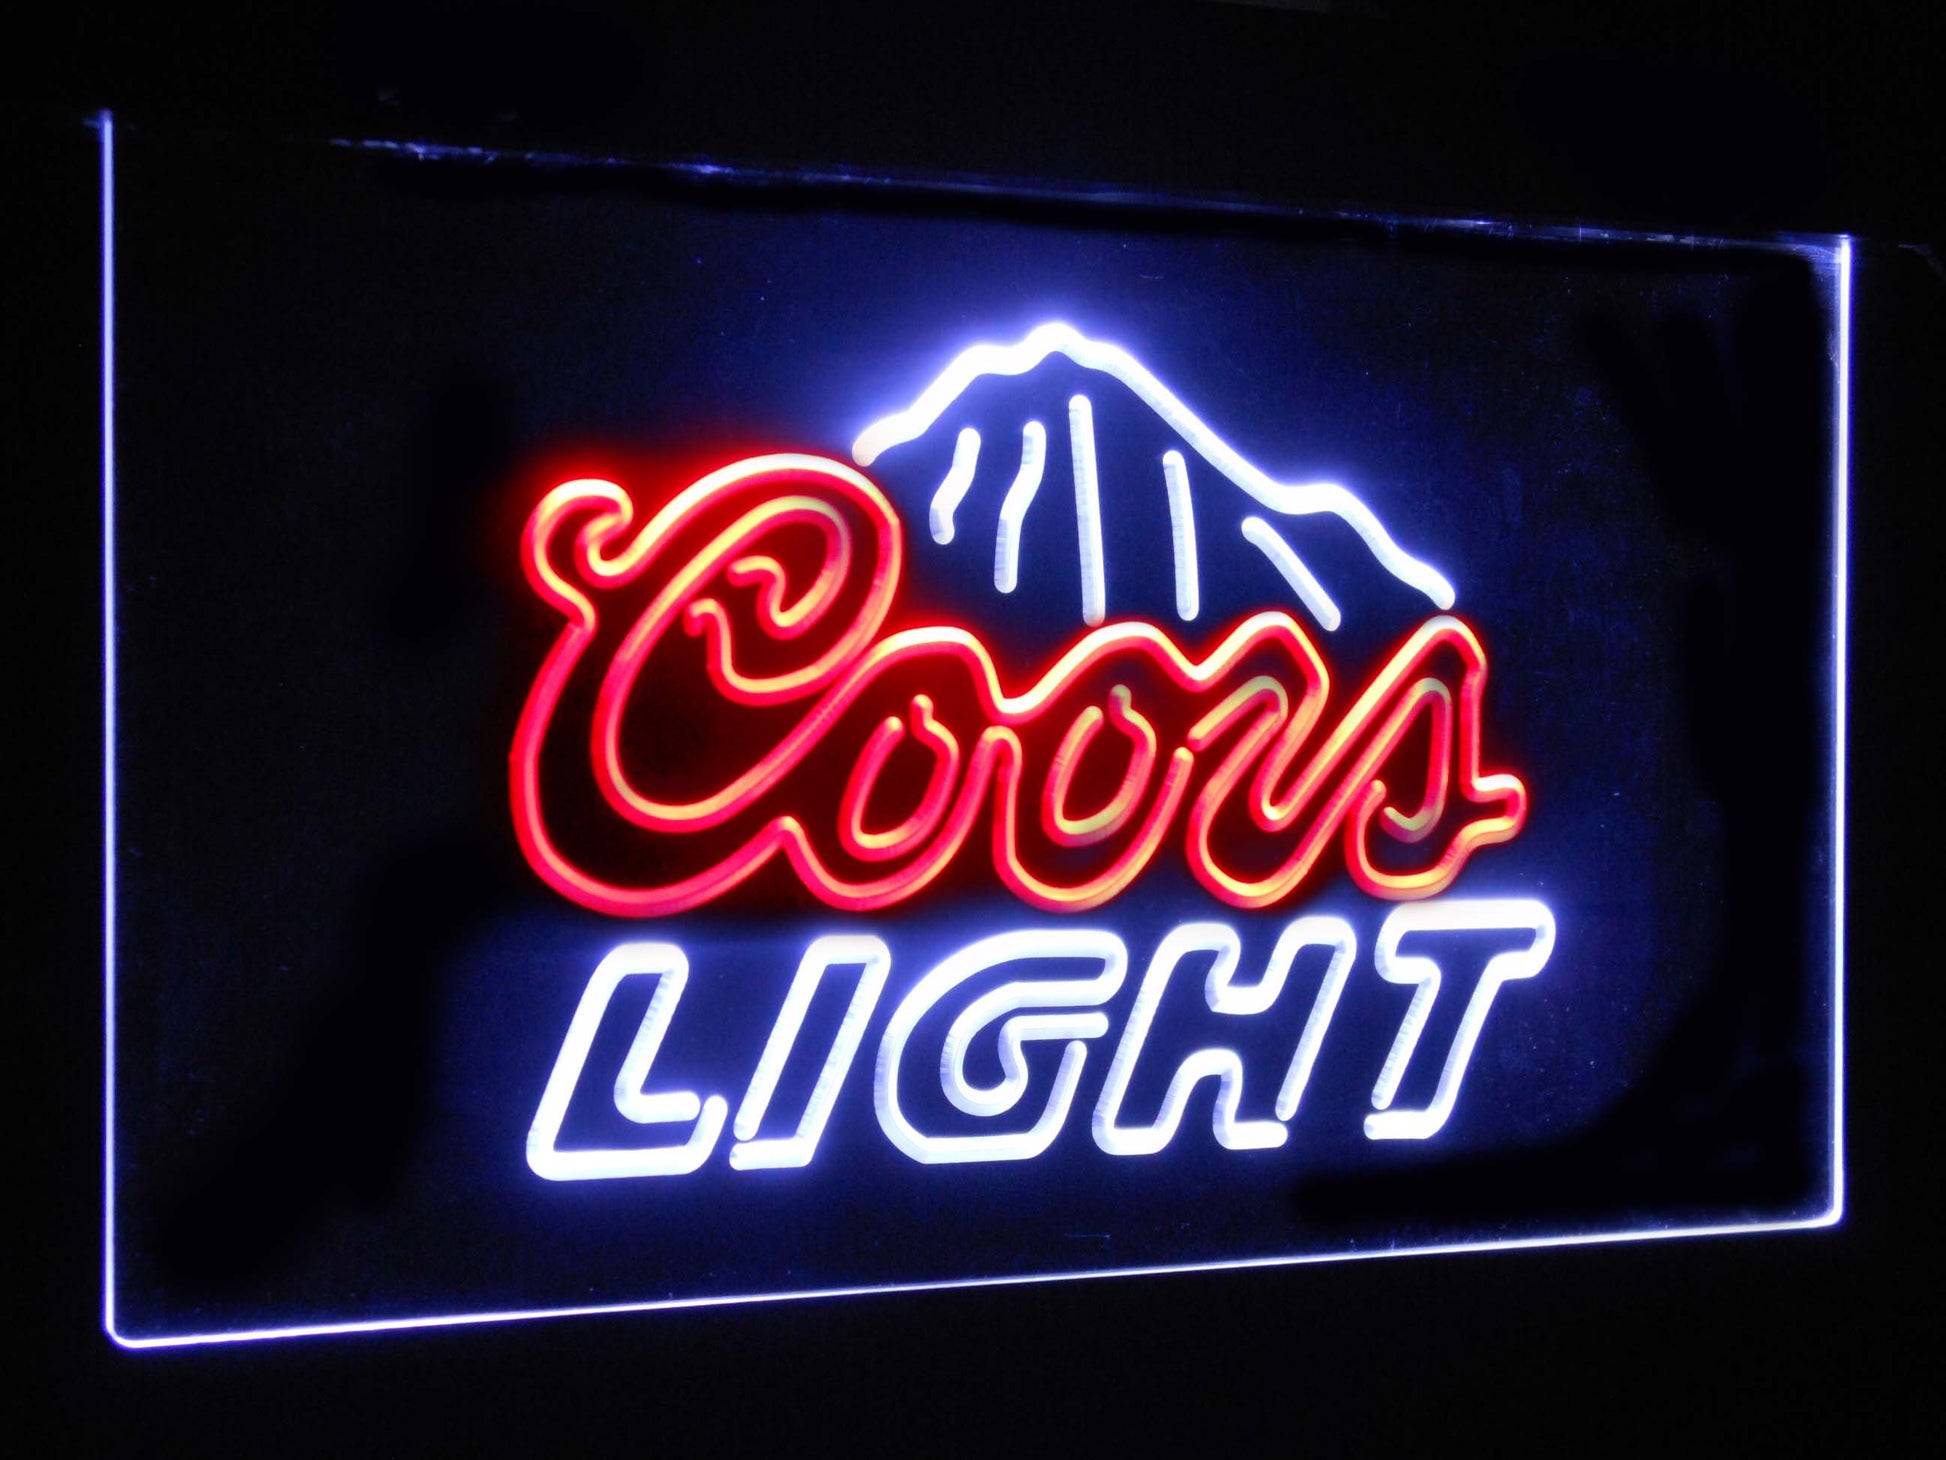 Coors Light Mountain  Bar Decoration Gift Dual Color Led Neon Light Signs st6-a2012 by Woody Signs Co. - Handmade Crafted Unique Wooden Creative